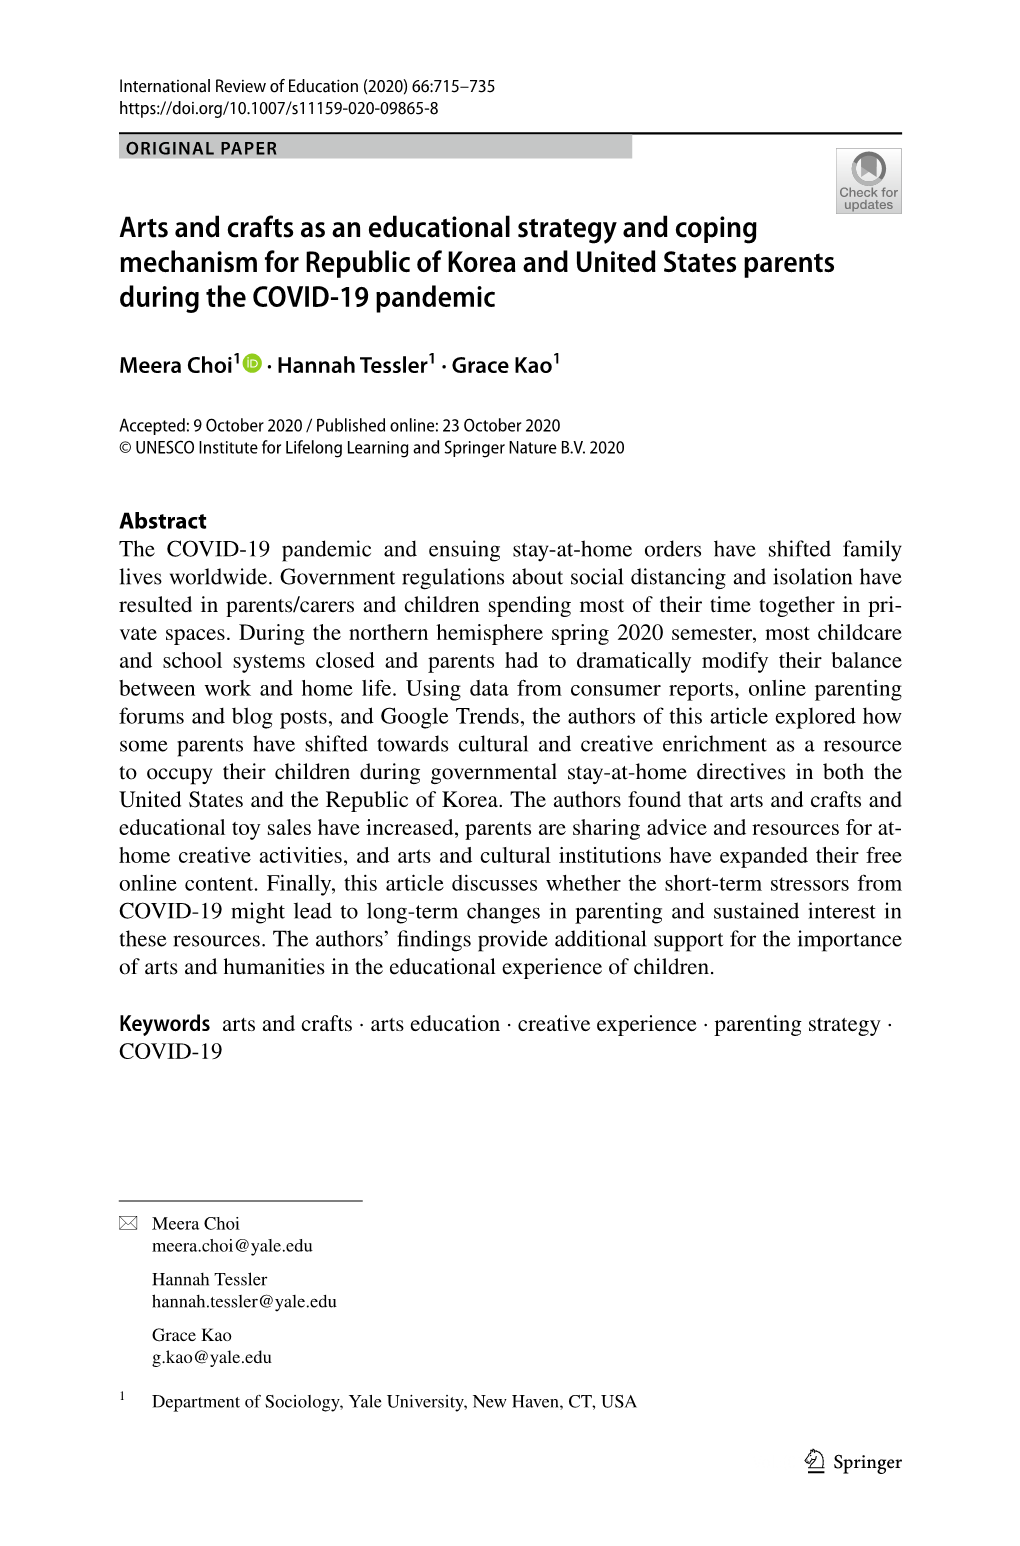 Arts and Crafts As an Educational Strategy and Coping Mechanism for Republic of Korea and United States Parents During the COVID‑19 Pandemic